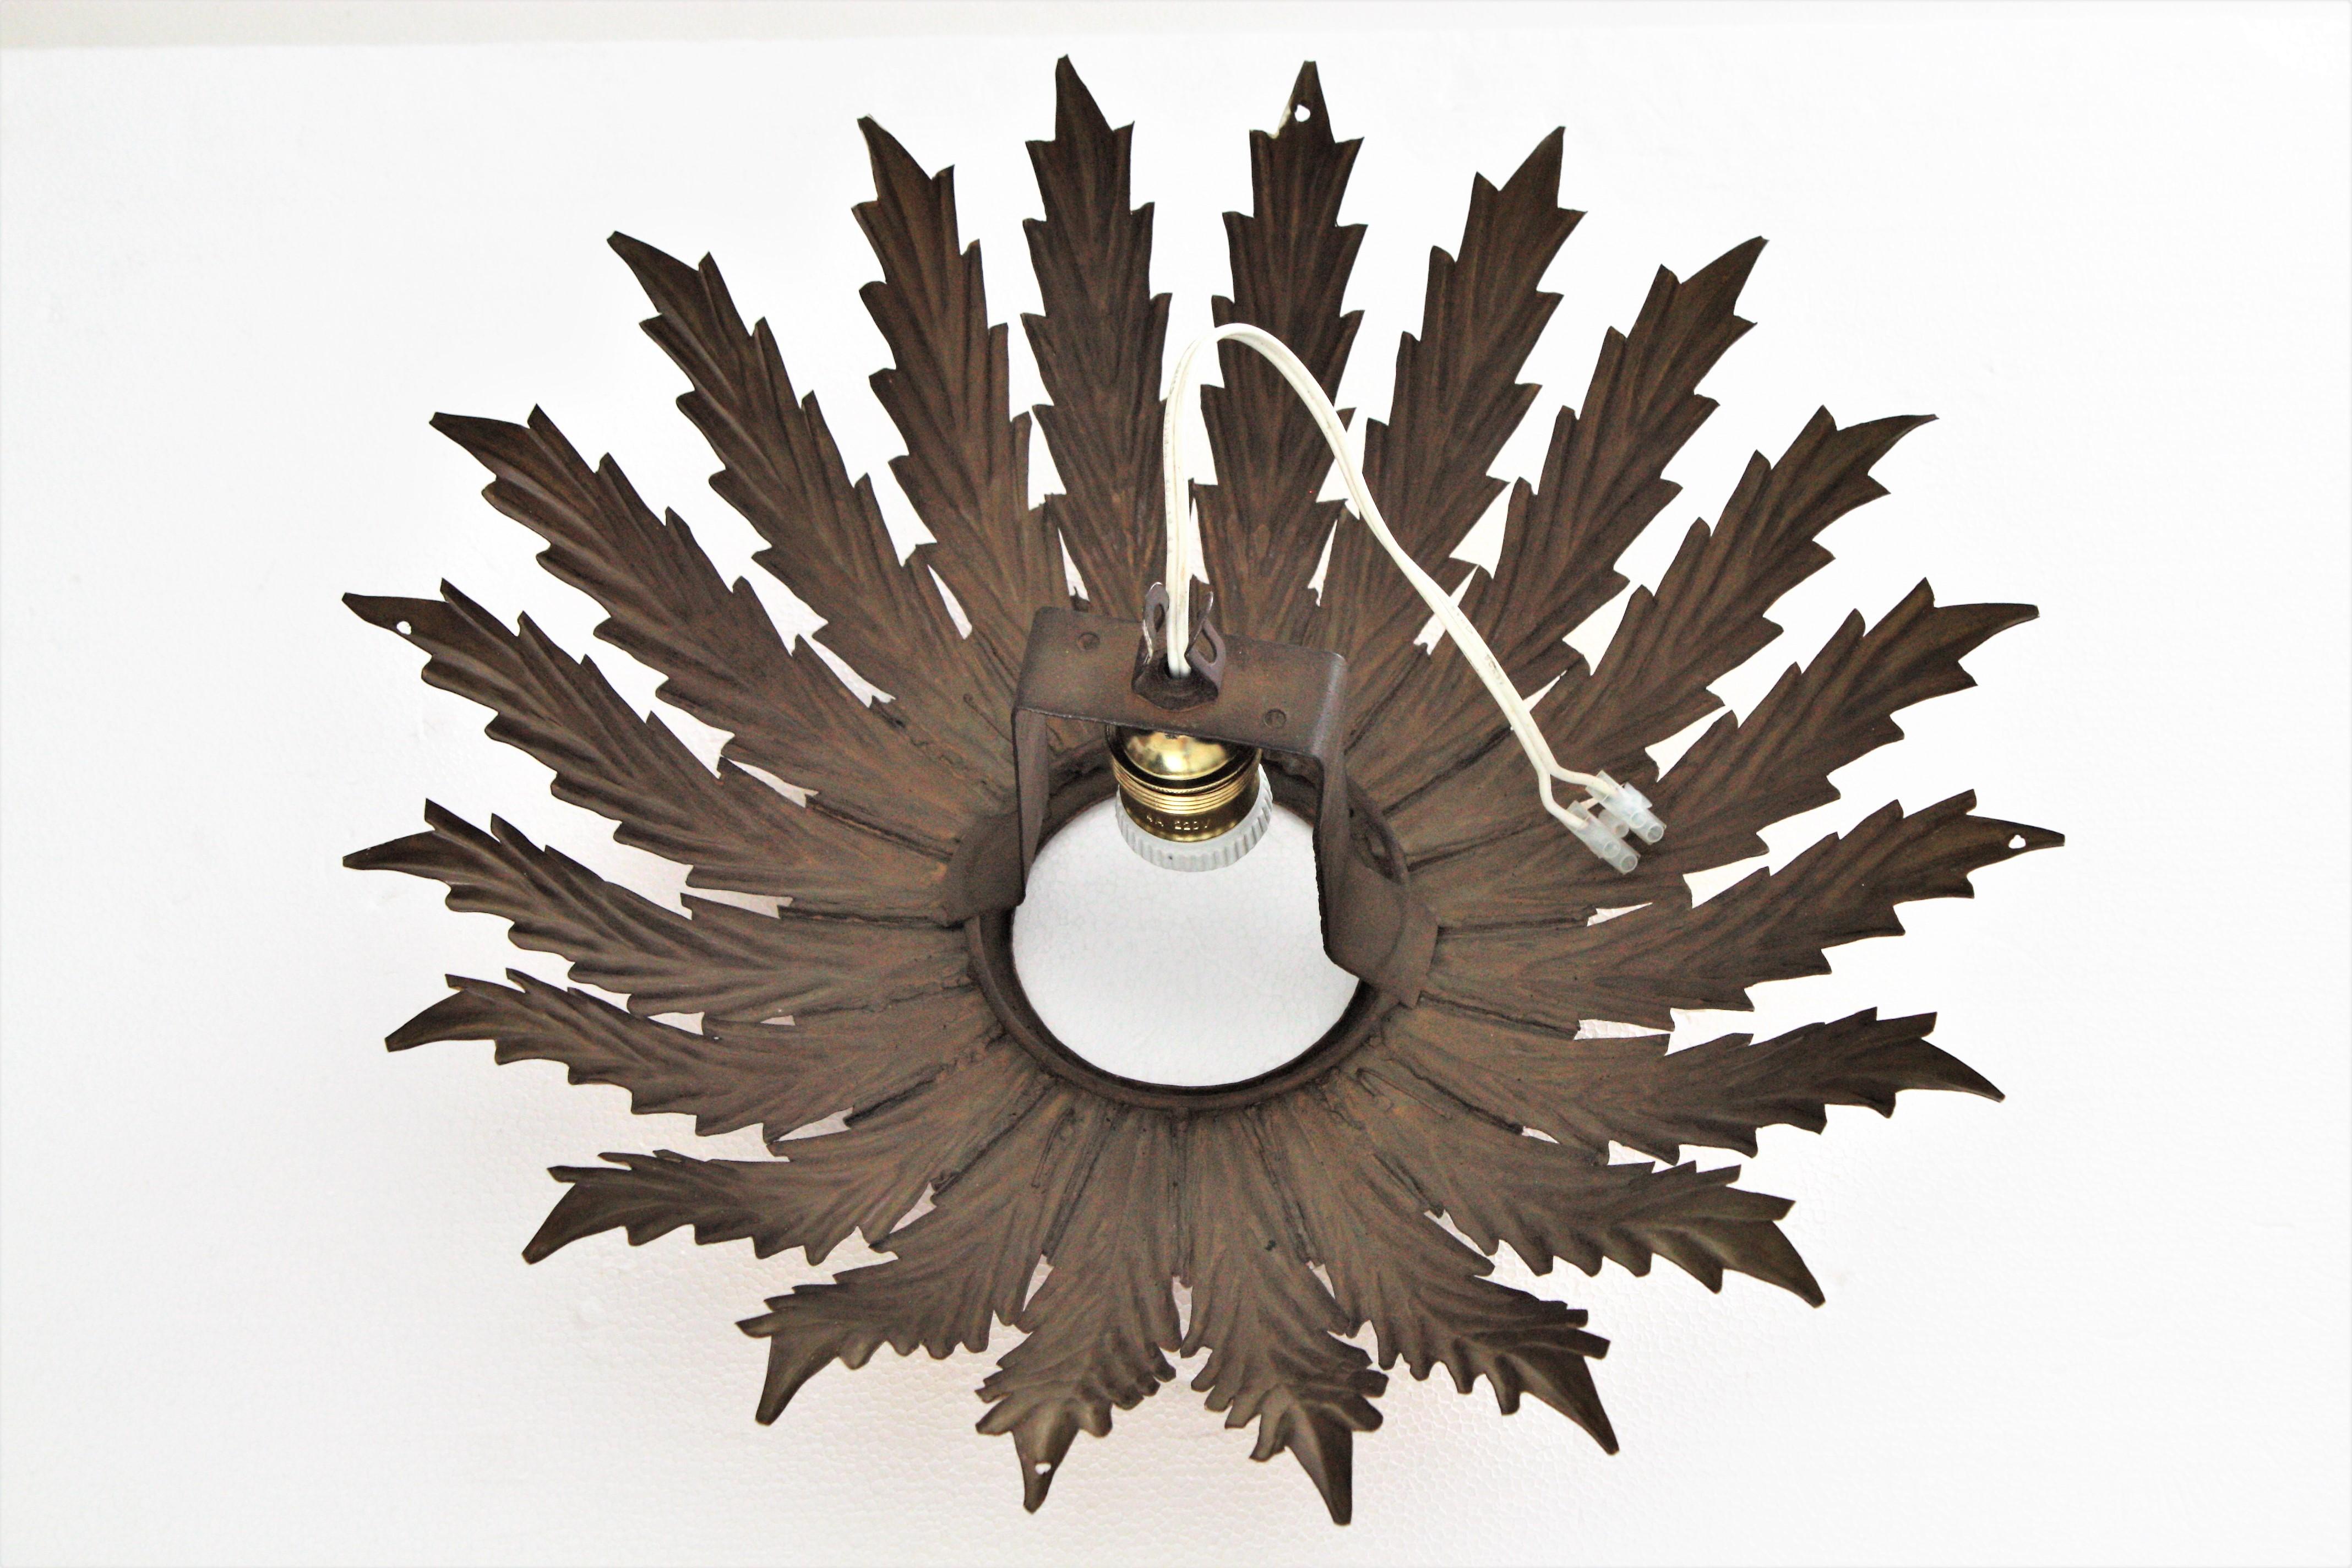 French Sunburst Light Fixture with Scalloped Leaves, Gilt Iron,  1950s For Sale 4